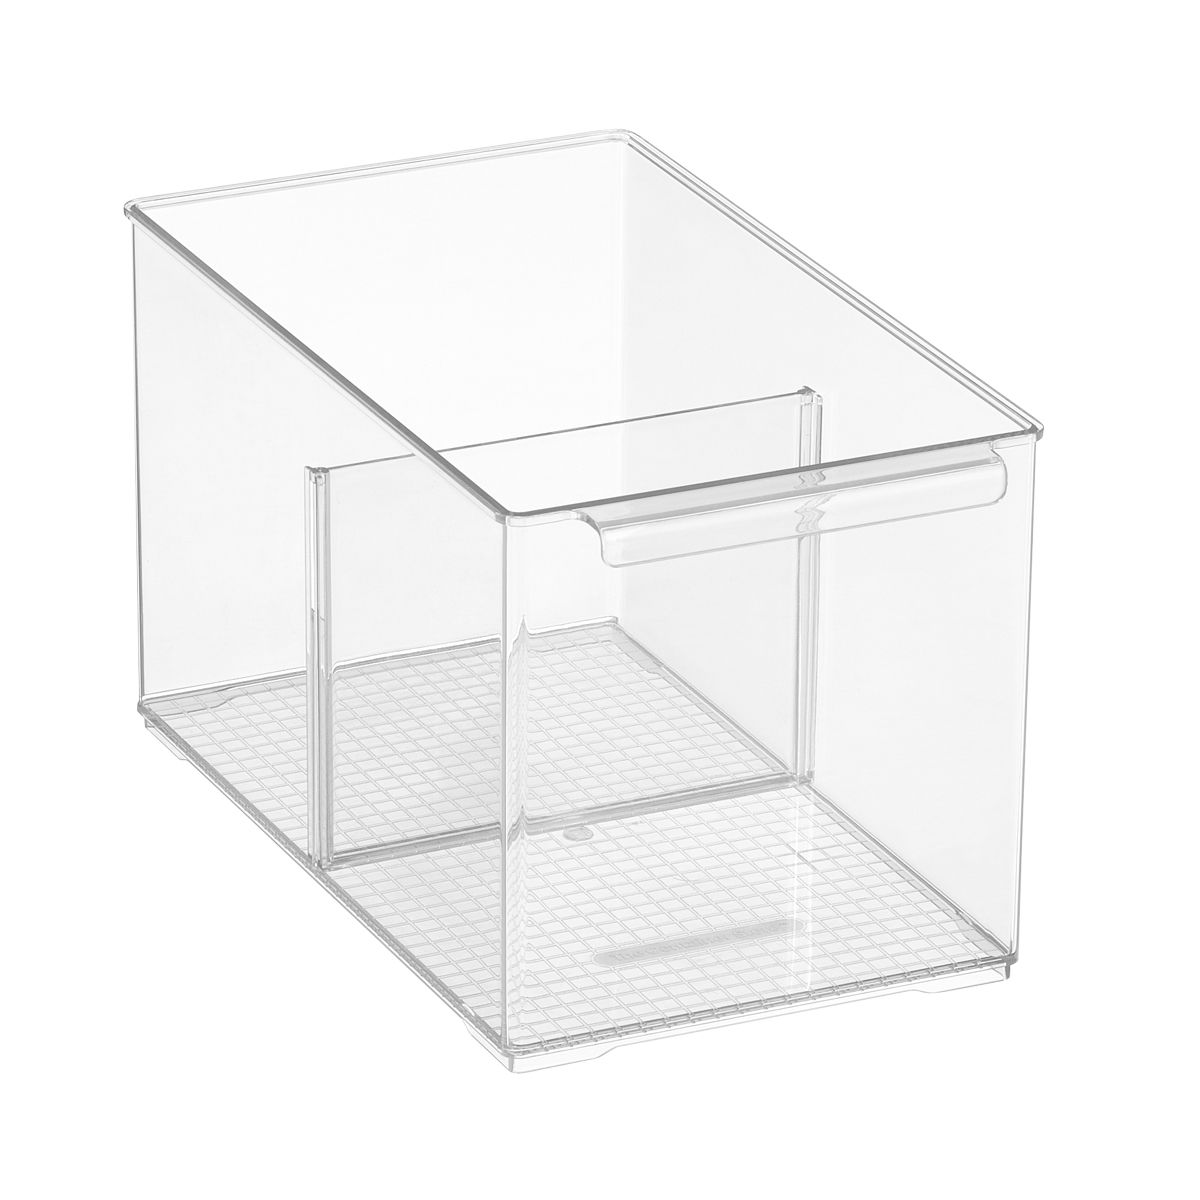 Everything Organizer Medium Cabinet Depth Pantry Bin w/ Divider Clear | The Container Store